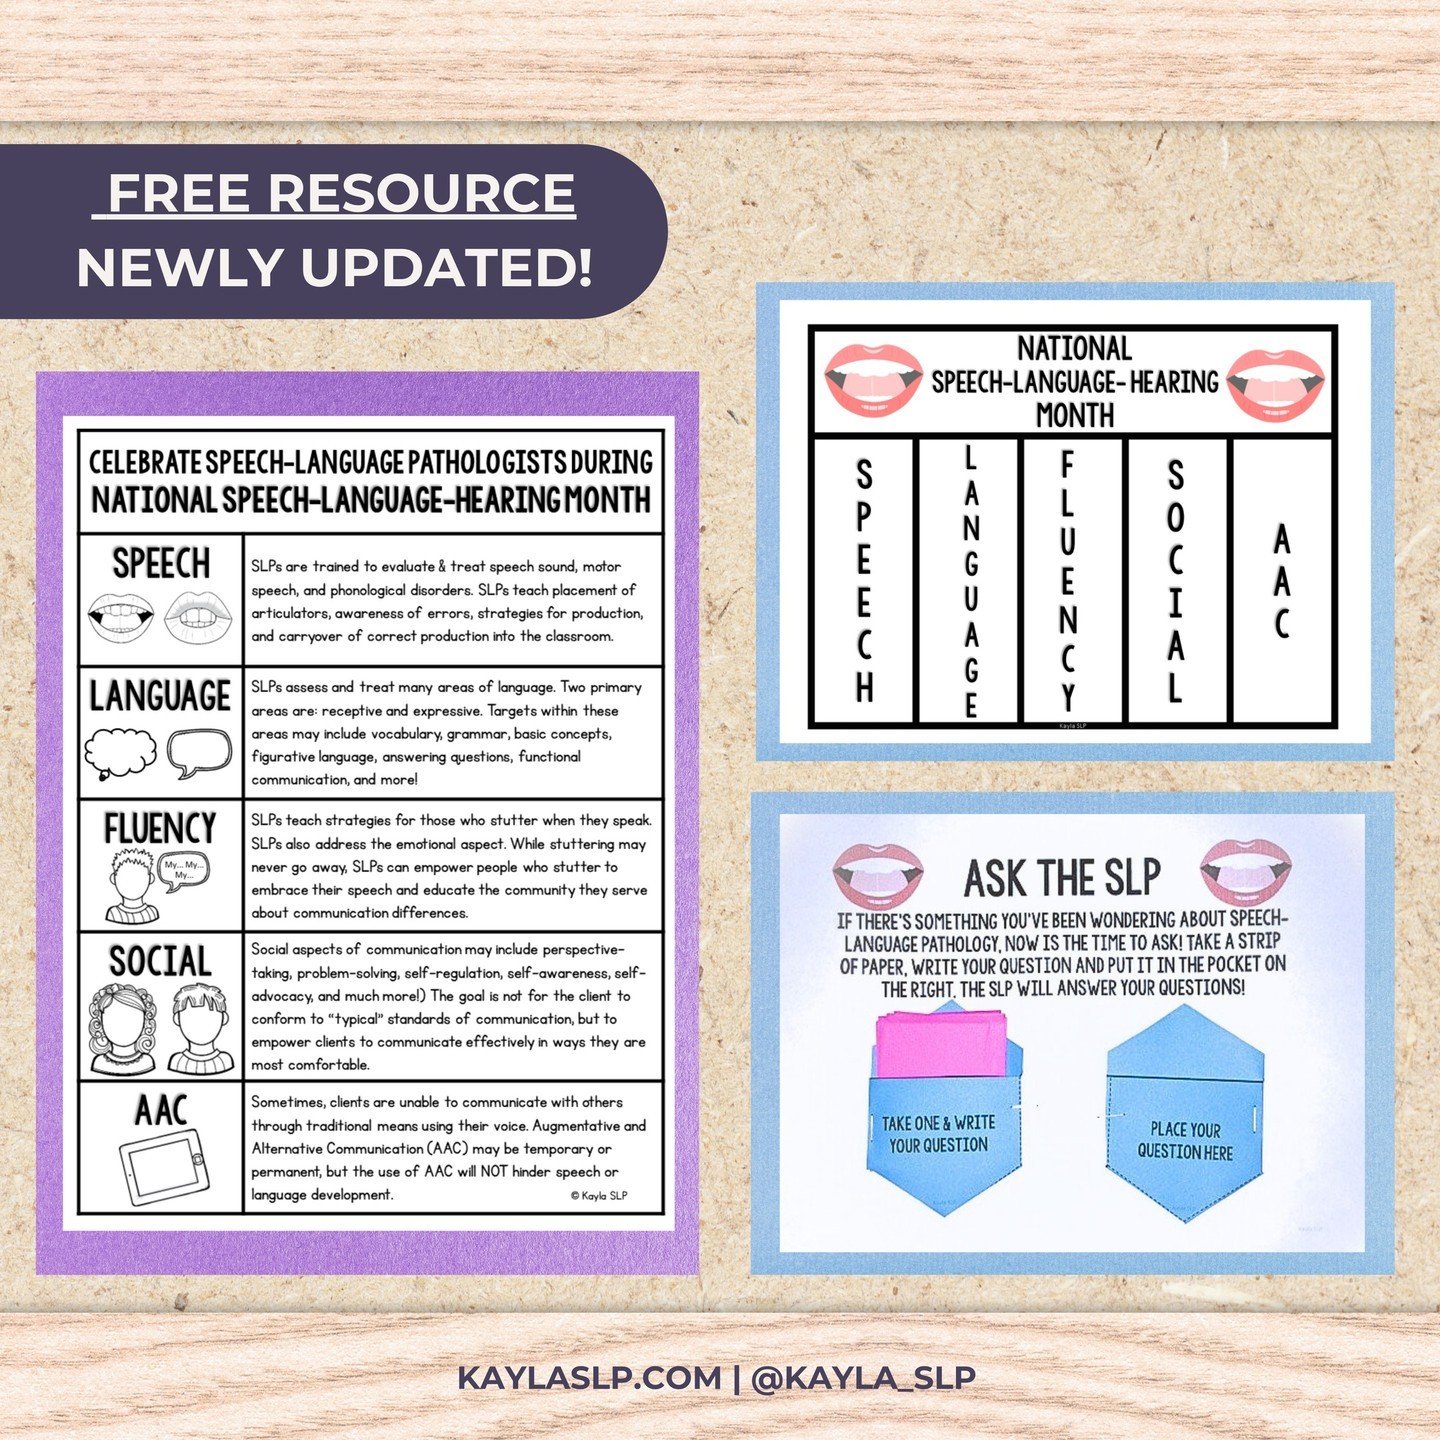 🥳 Let's celebrate National Speech-Language-Hearing Month! These resources for National Speech-Language-Hearing Month have been specifically created for Speech-Language Pathologists. The downloadable bulletin board kit offers an eye-catching and educ